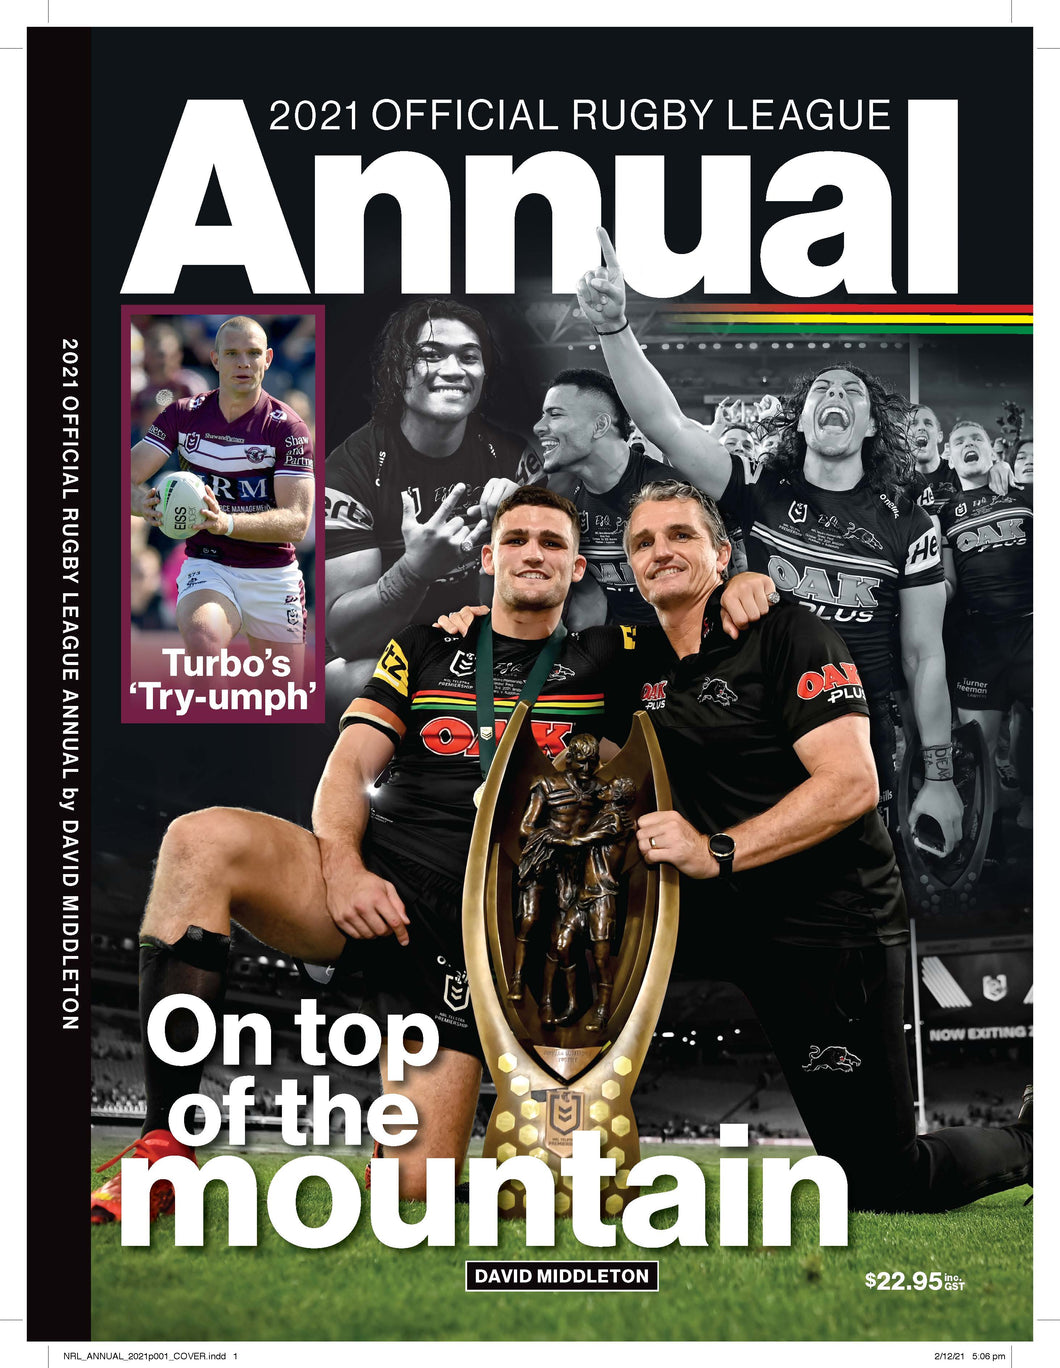 2021 Official Rugby League Annual